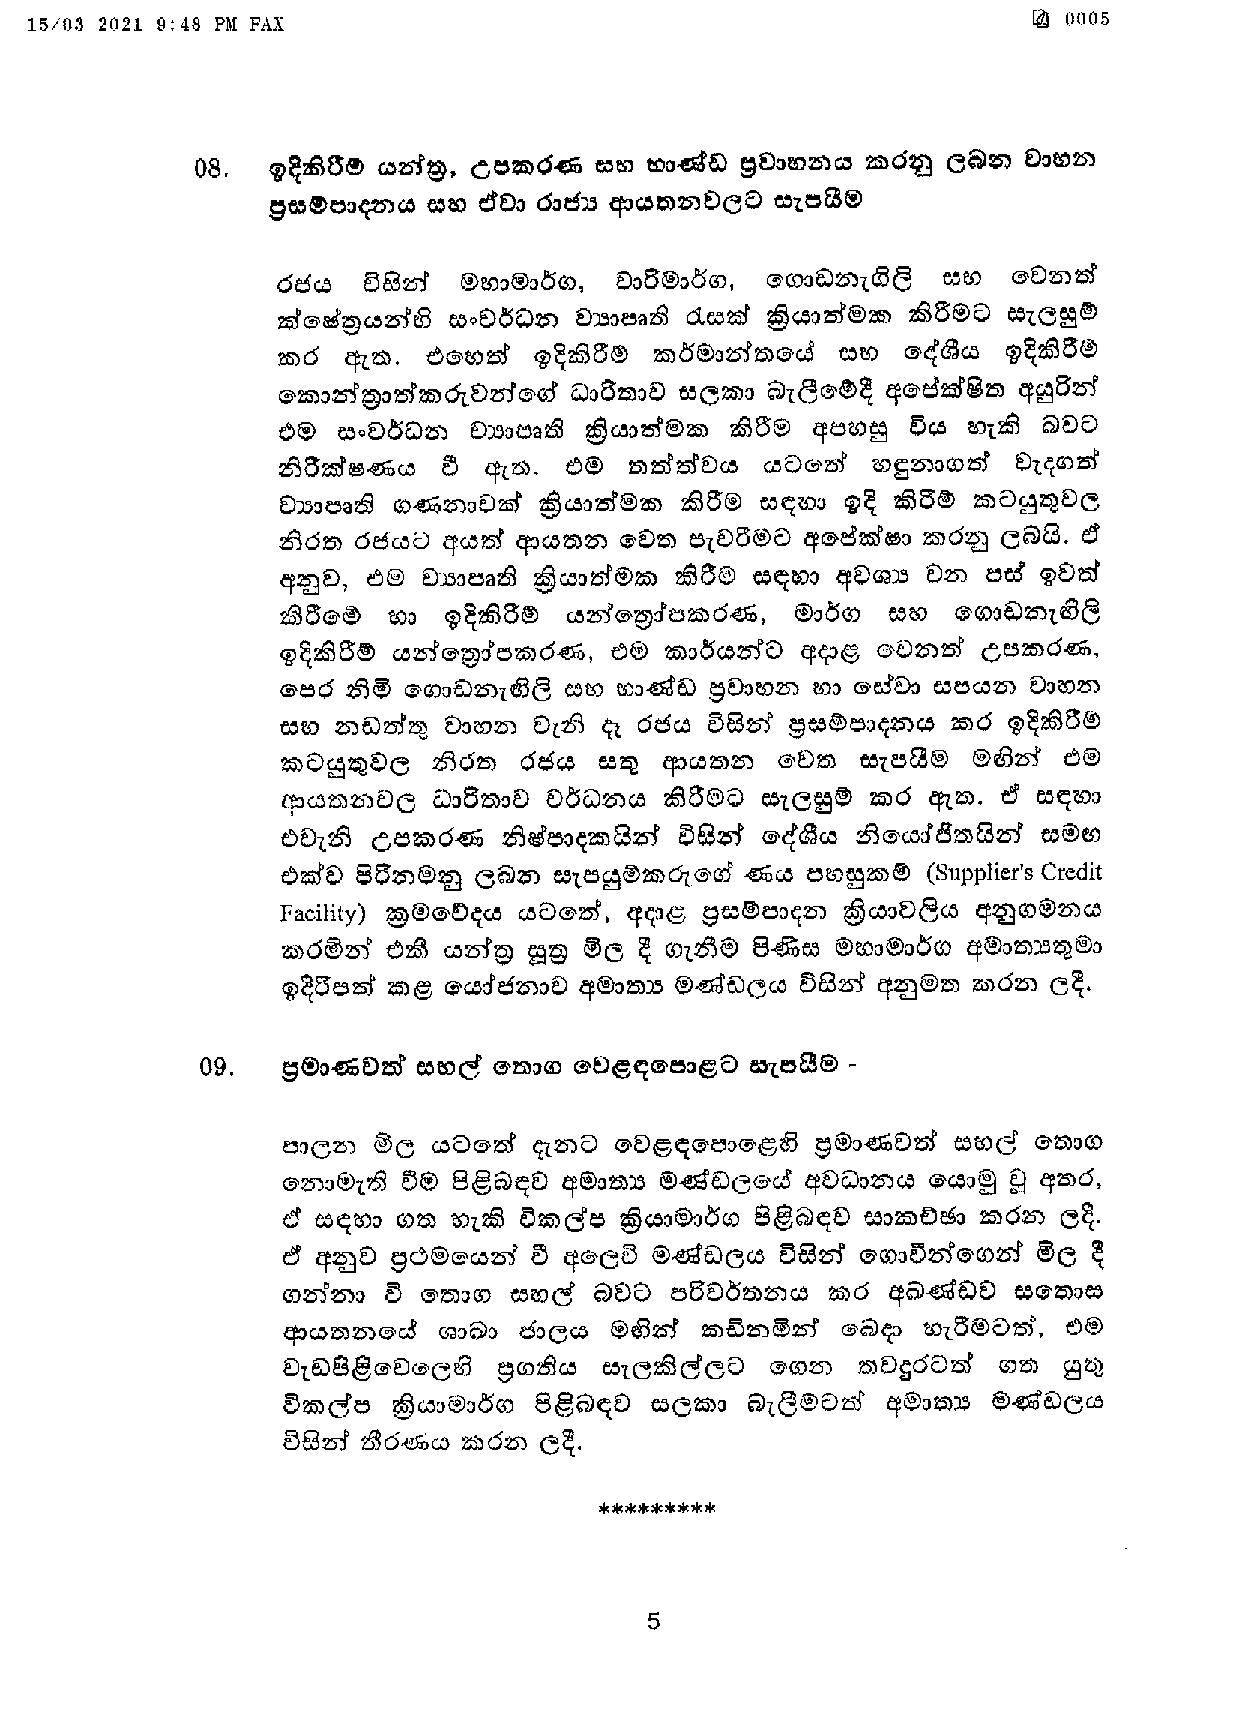 Cabinet Decision on 15.03.2021 page 005